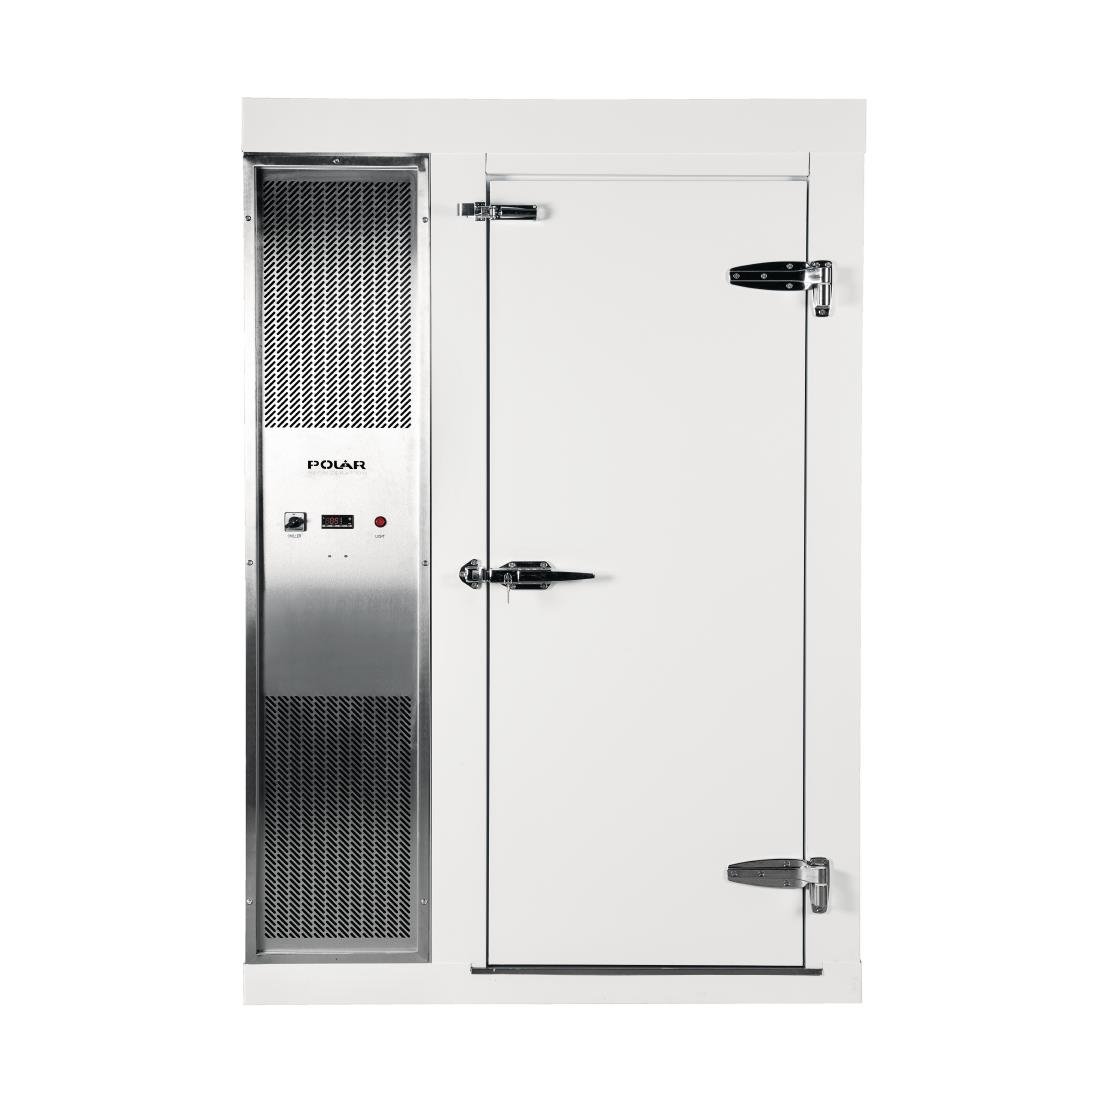 DS488-CWH Polar U-Series 2.1 x 1.8m Integral Walk In Cold Room White JD Catering Equipment Solutions Ltd